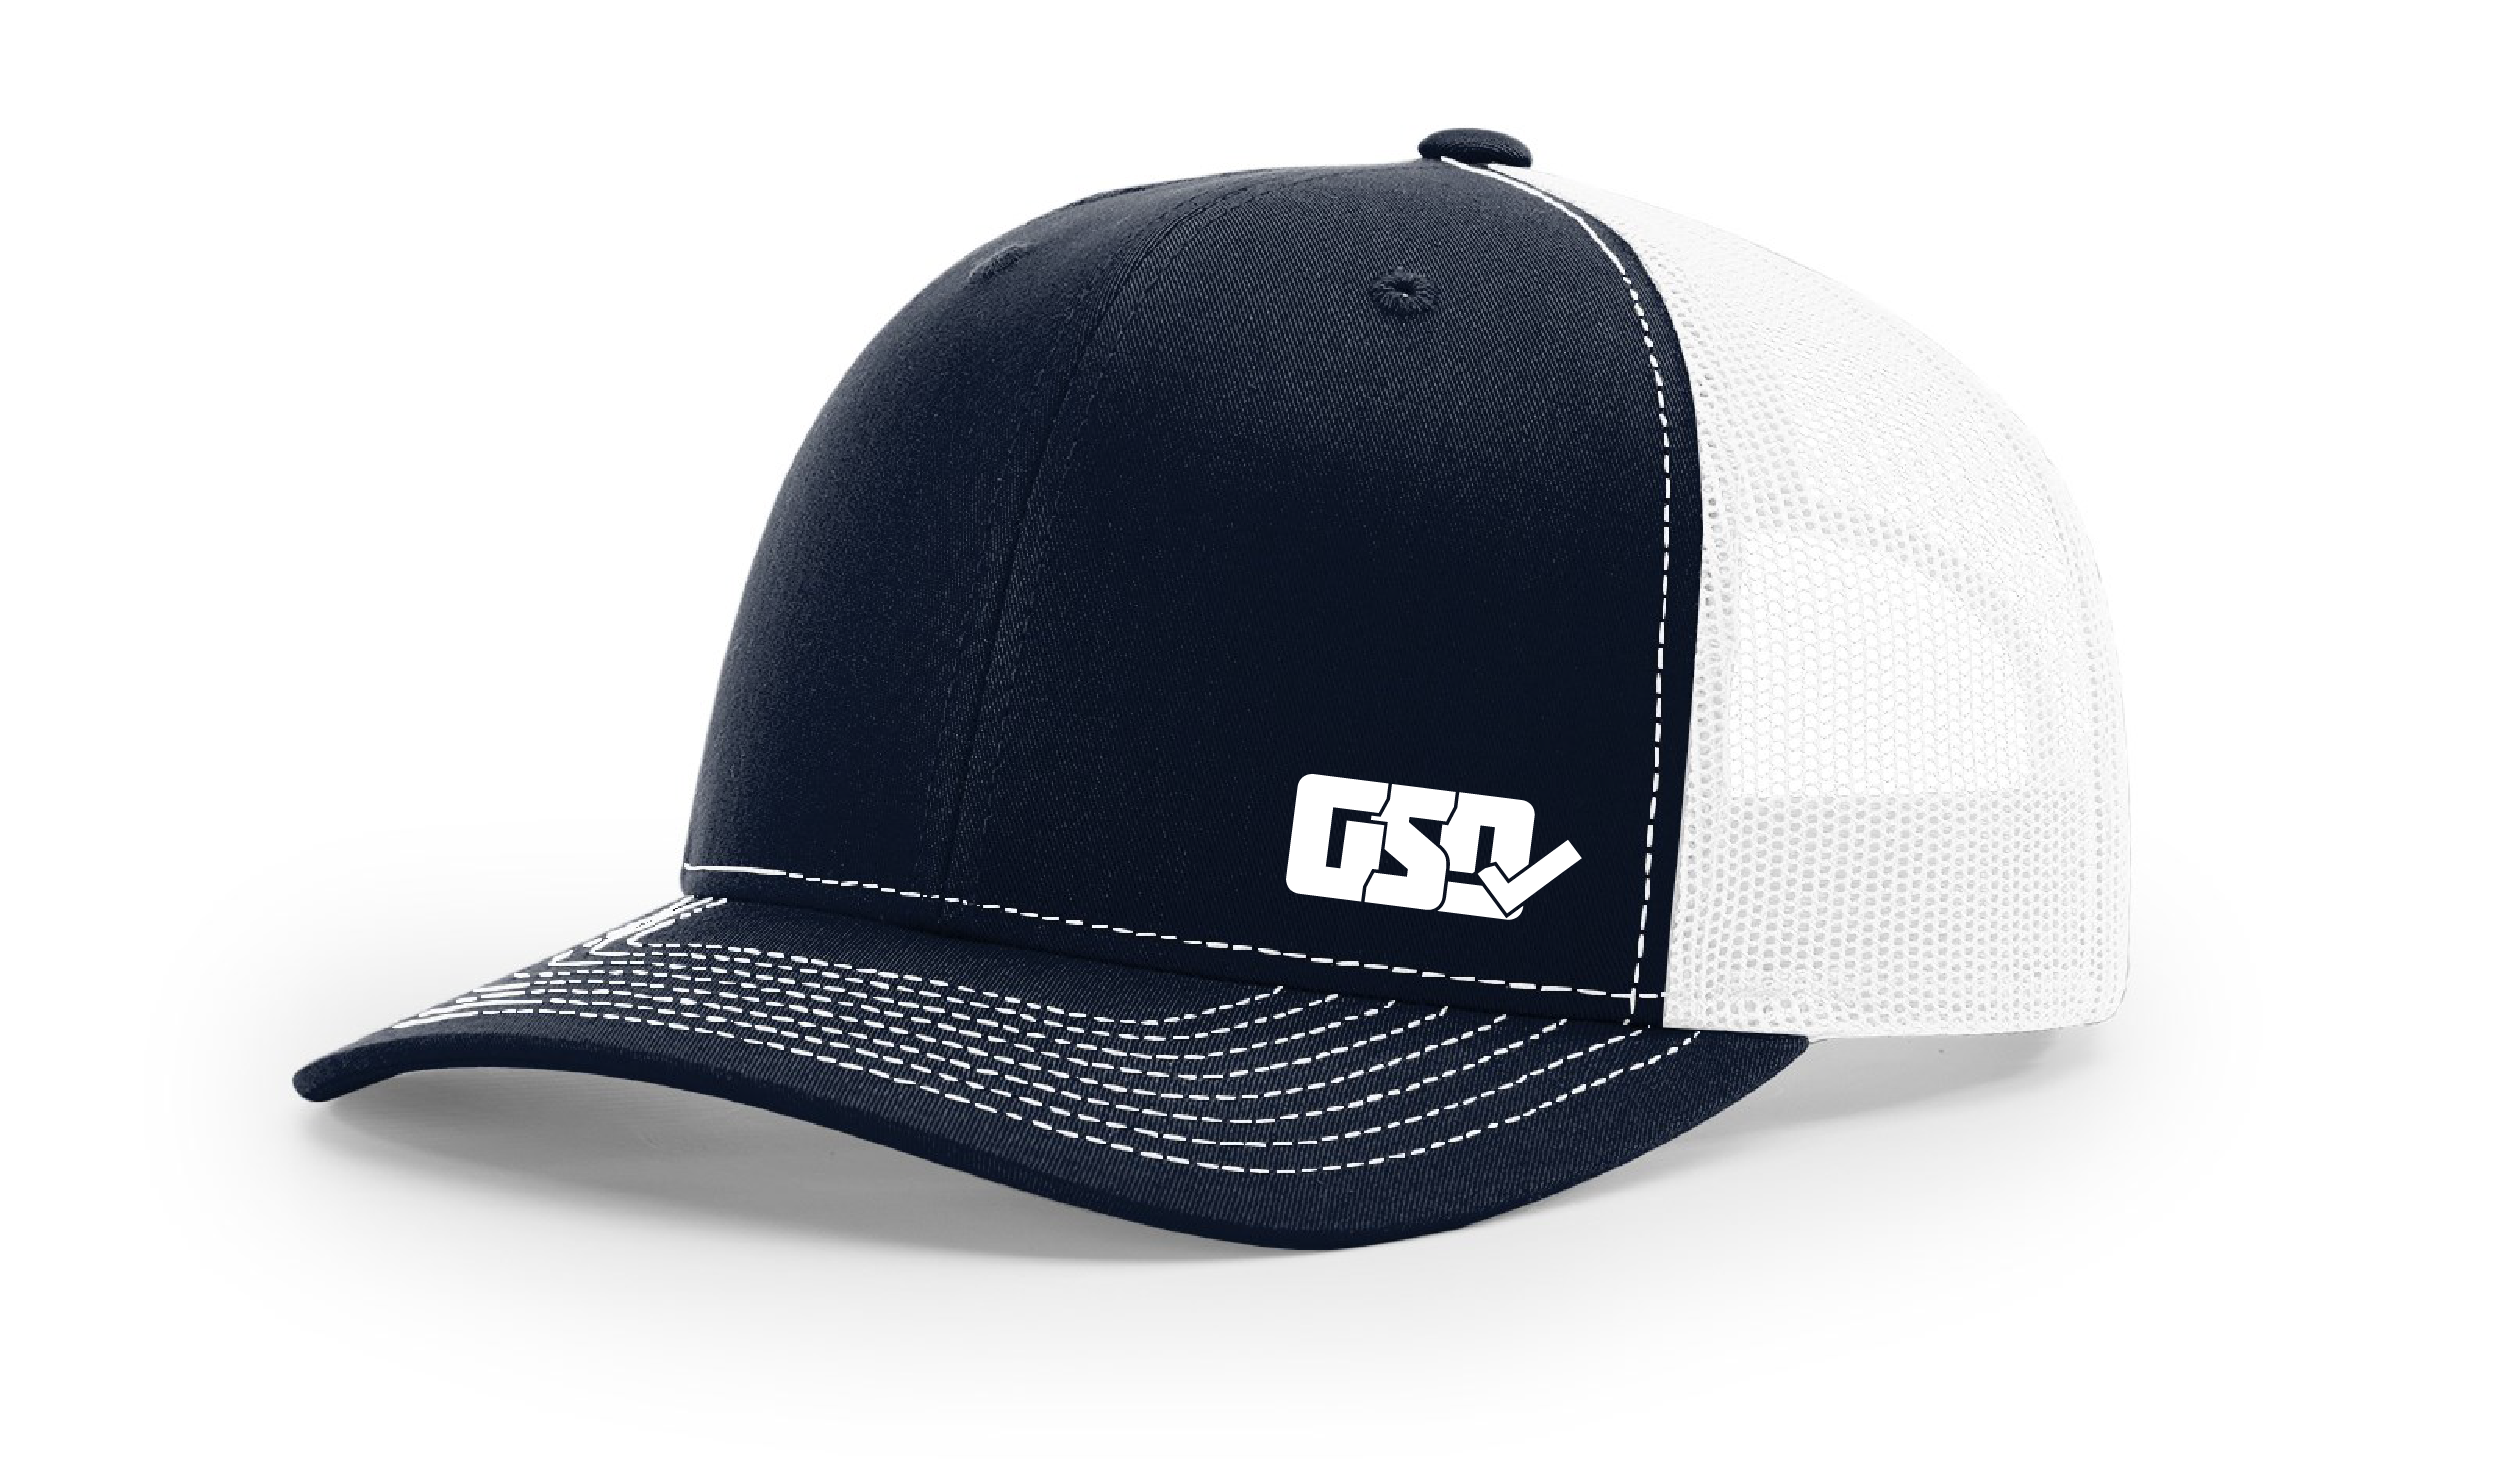 GSD SOLID LEFTY Mesh Snap Back Hat - Navy / White - “Babe Ruth” – GSD Gear